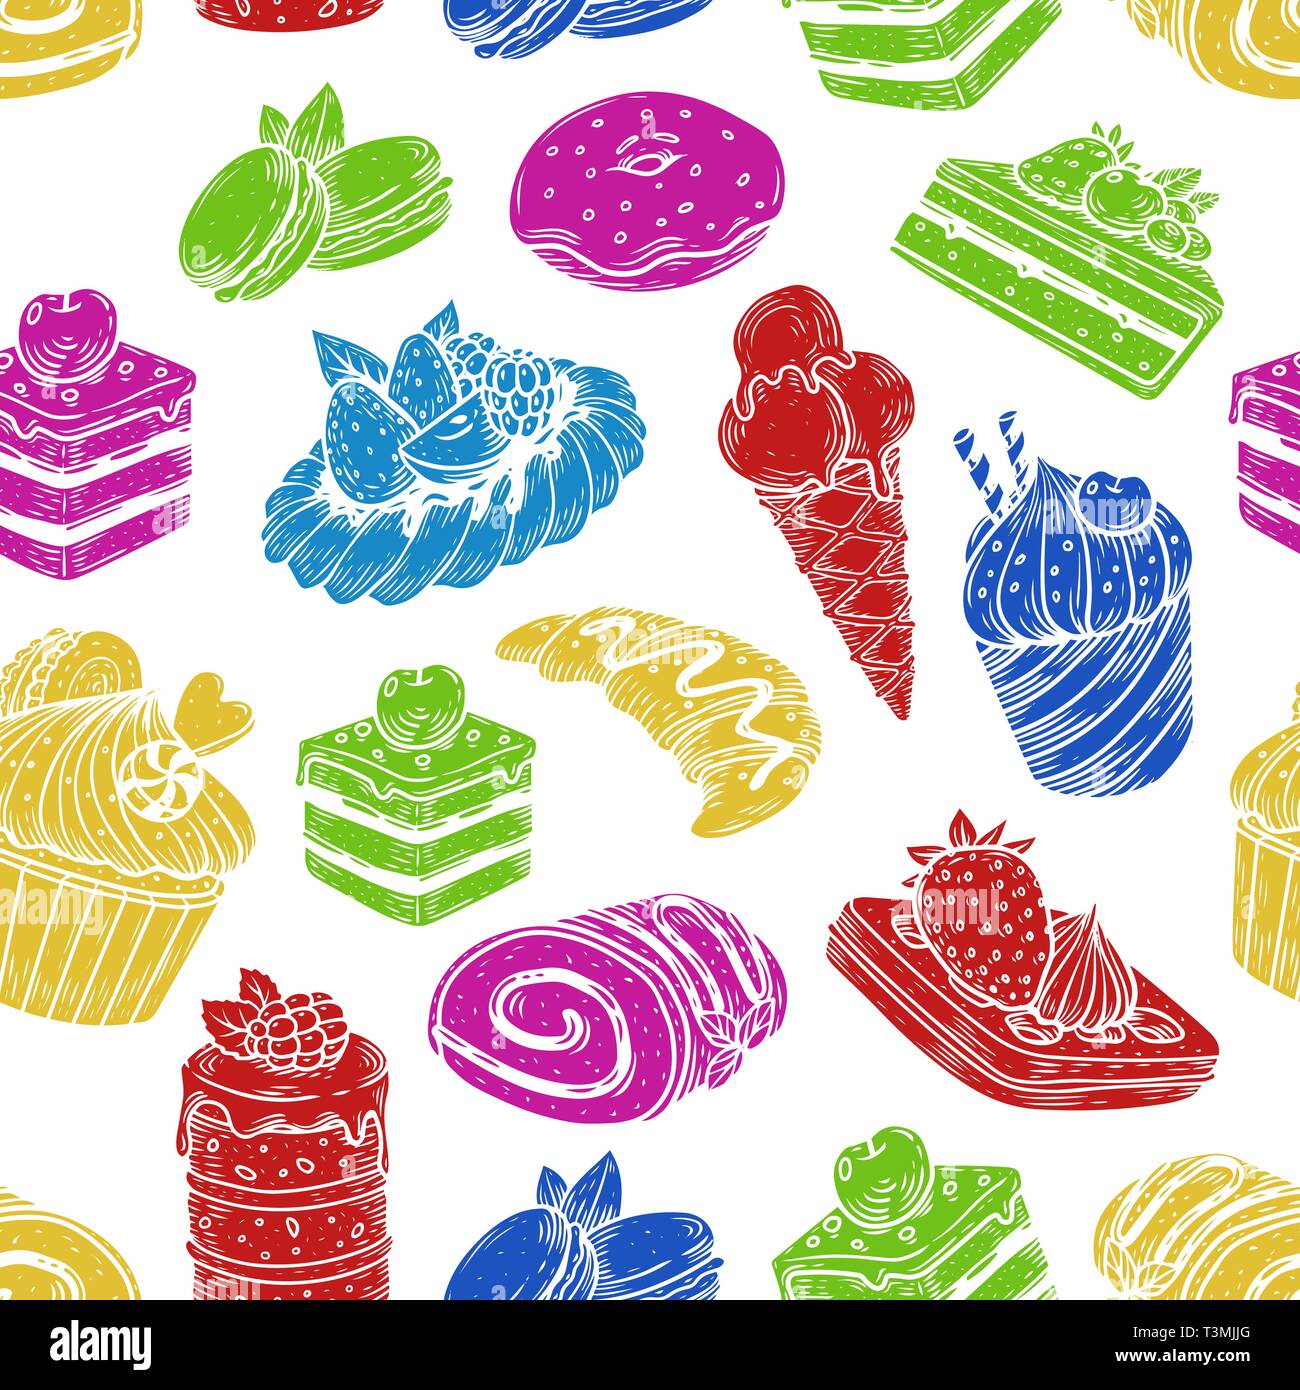 Sketch of sweets and bakery in seamless pattern Stock Vector